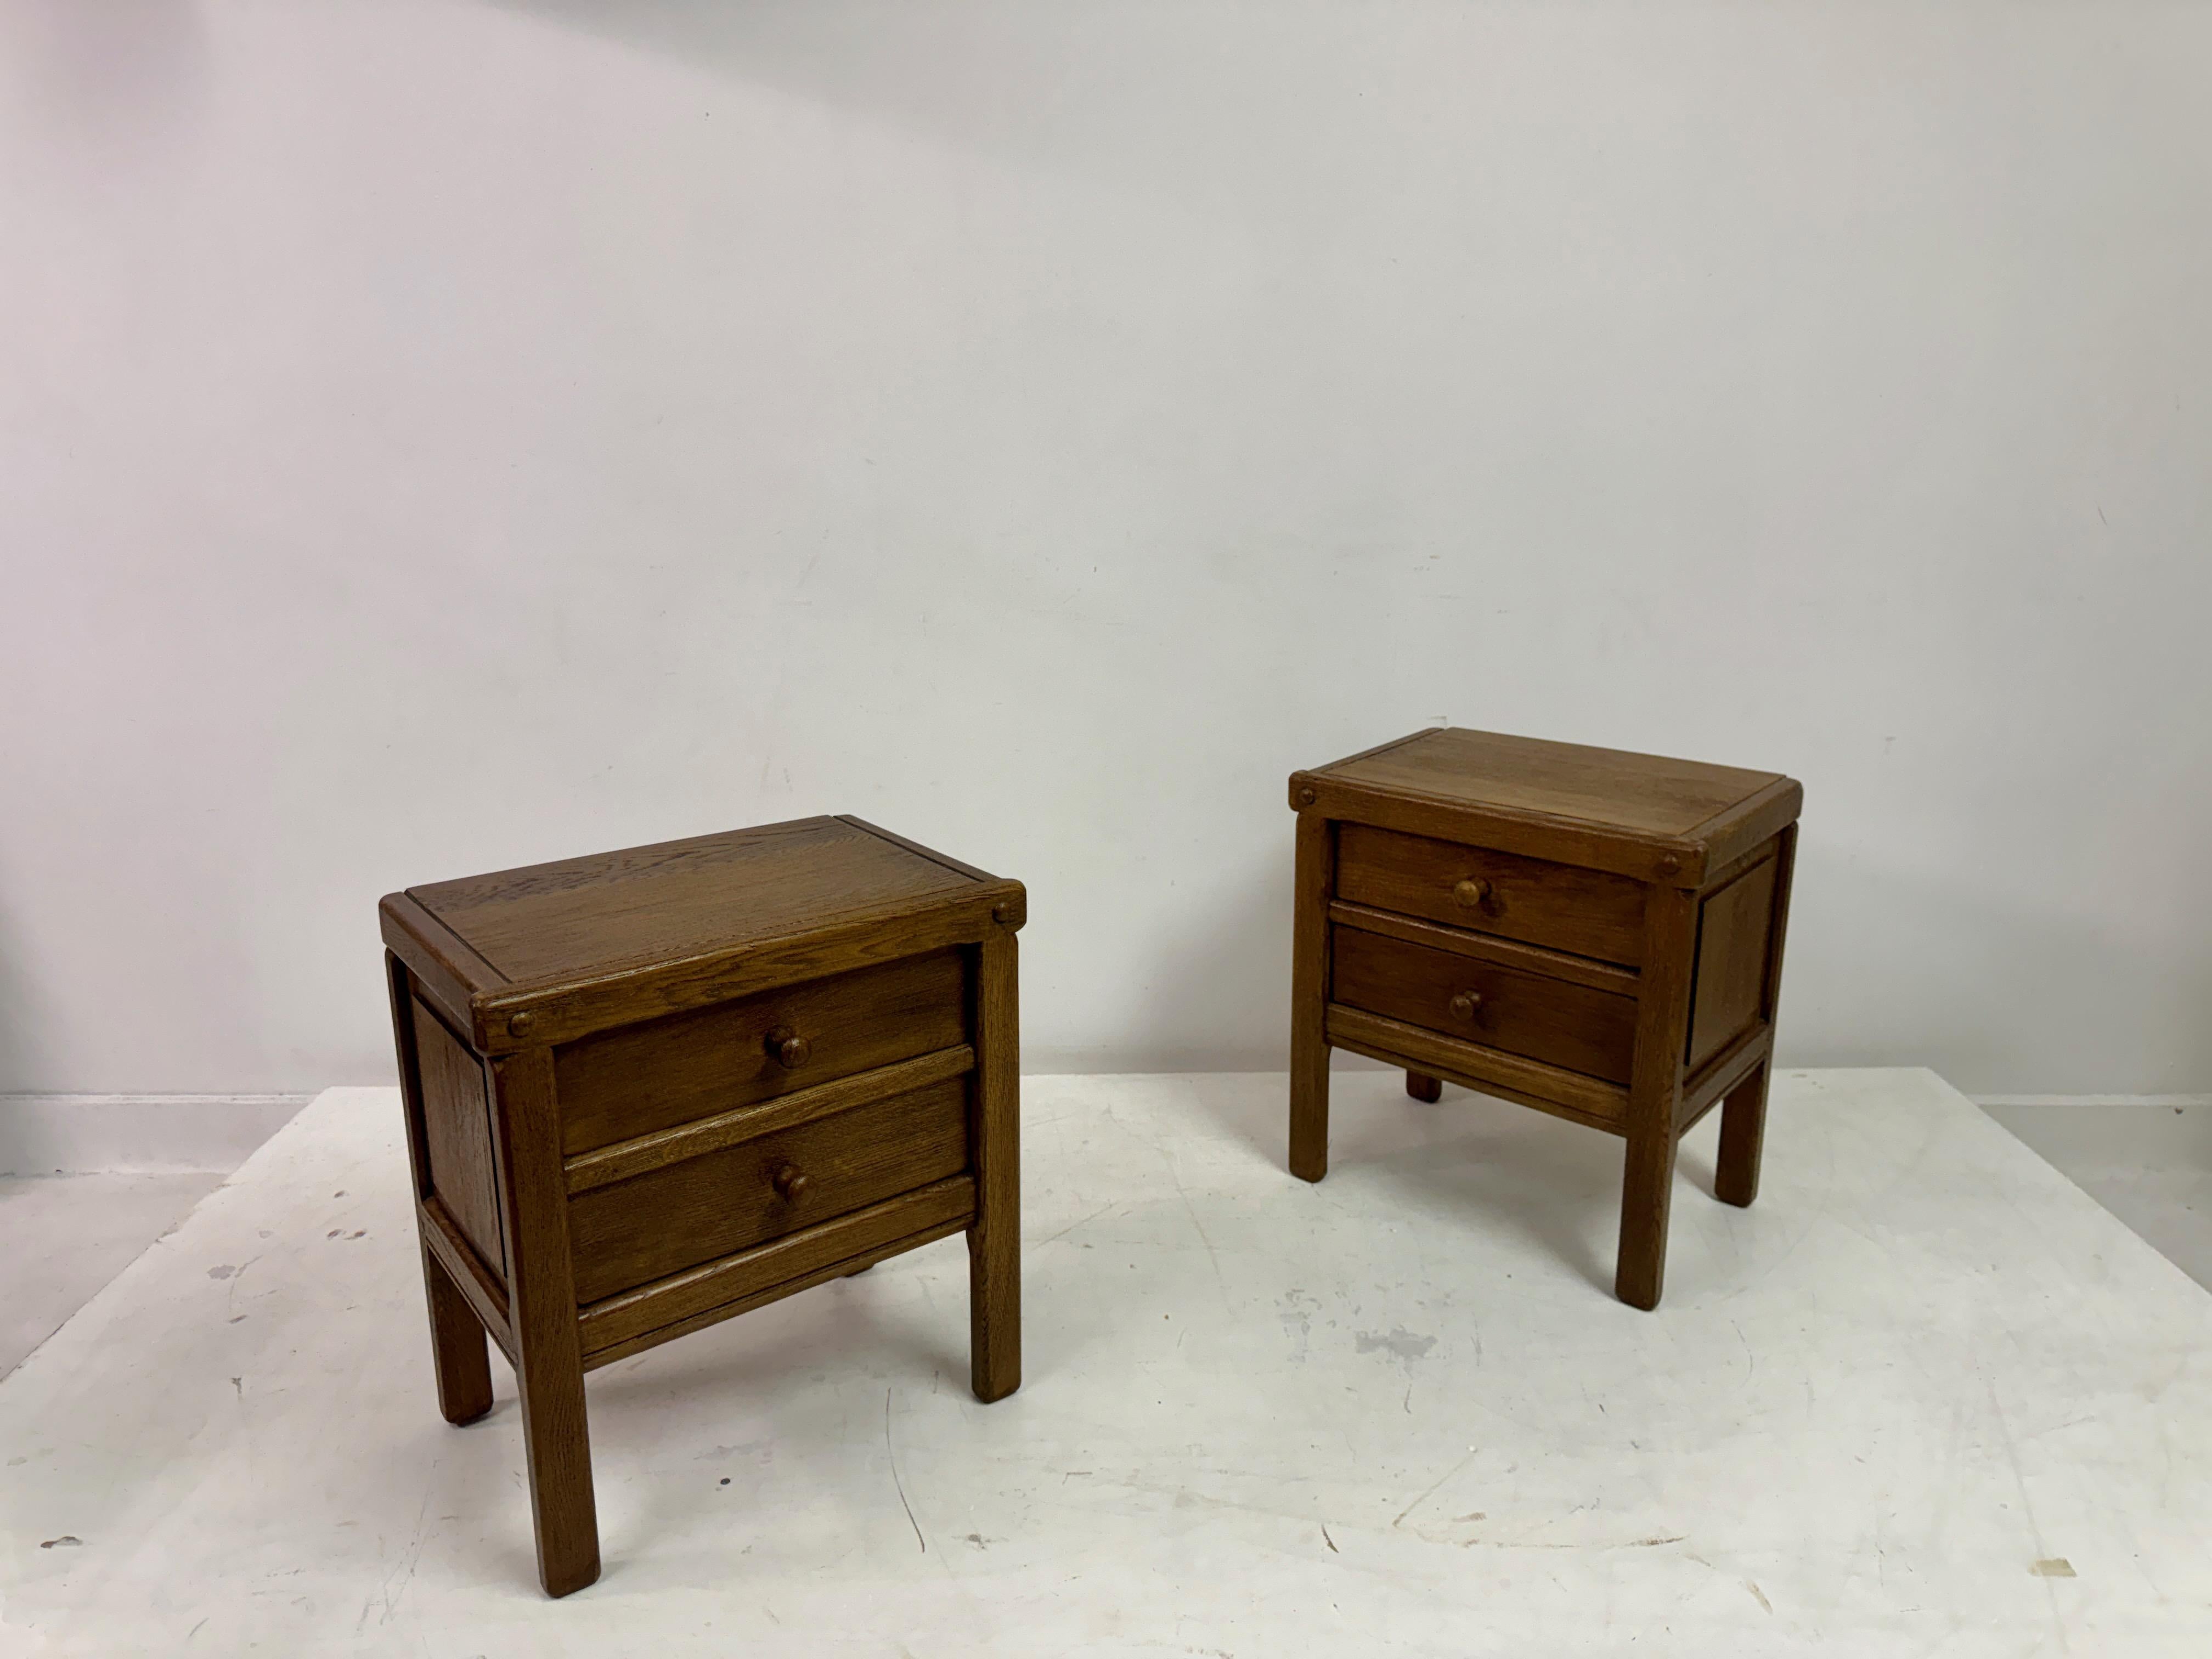 Pair of Brutalist Style Bedside Tables or Nightstands In Good Condition For Sale In London, London